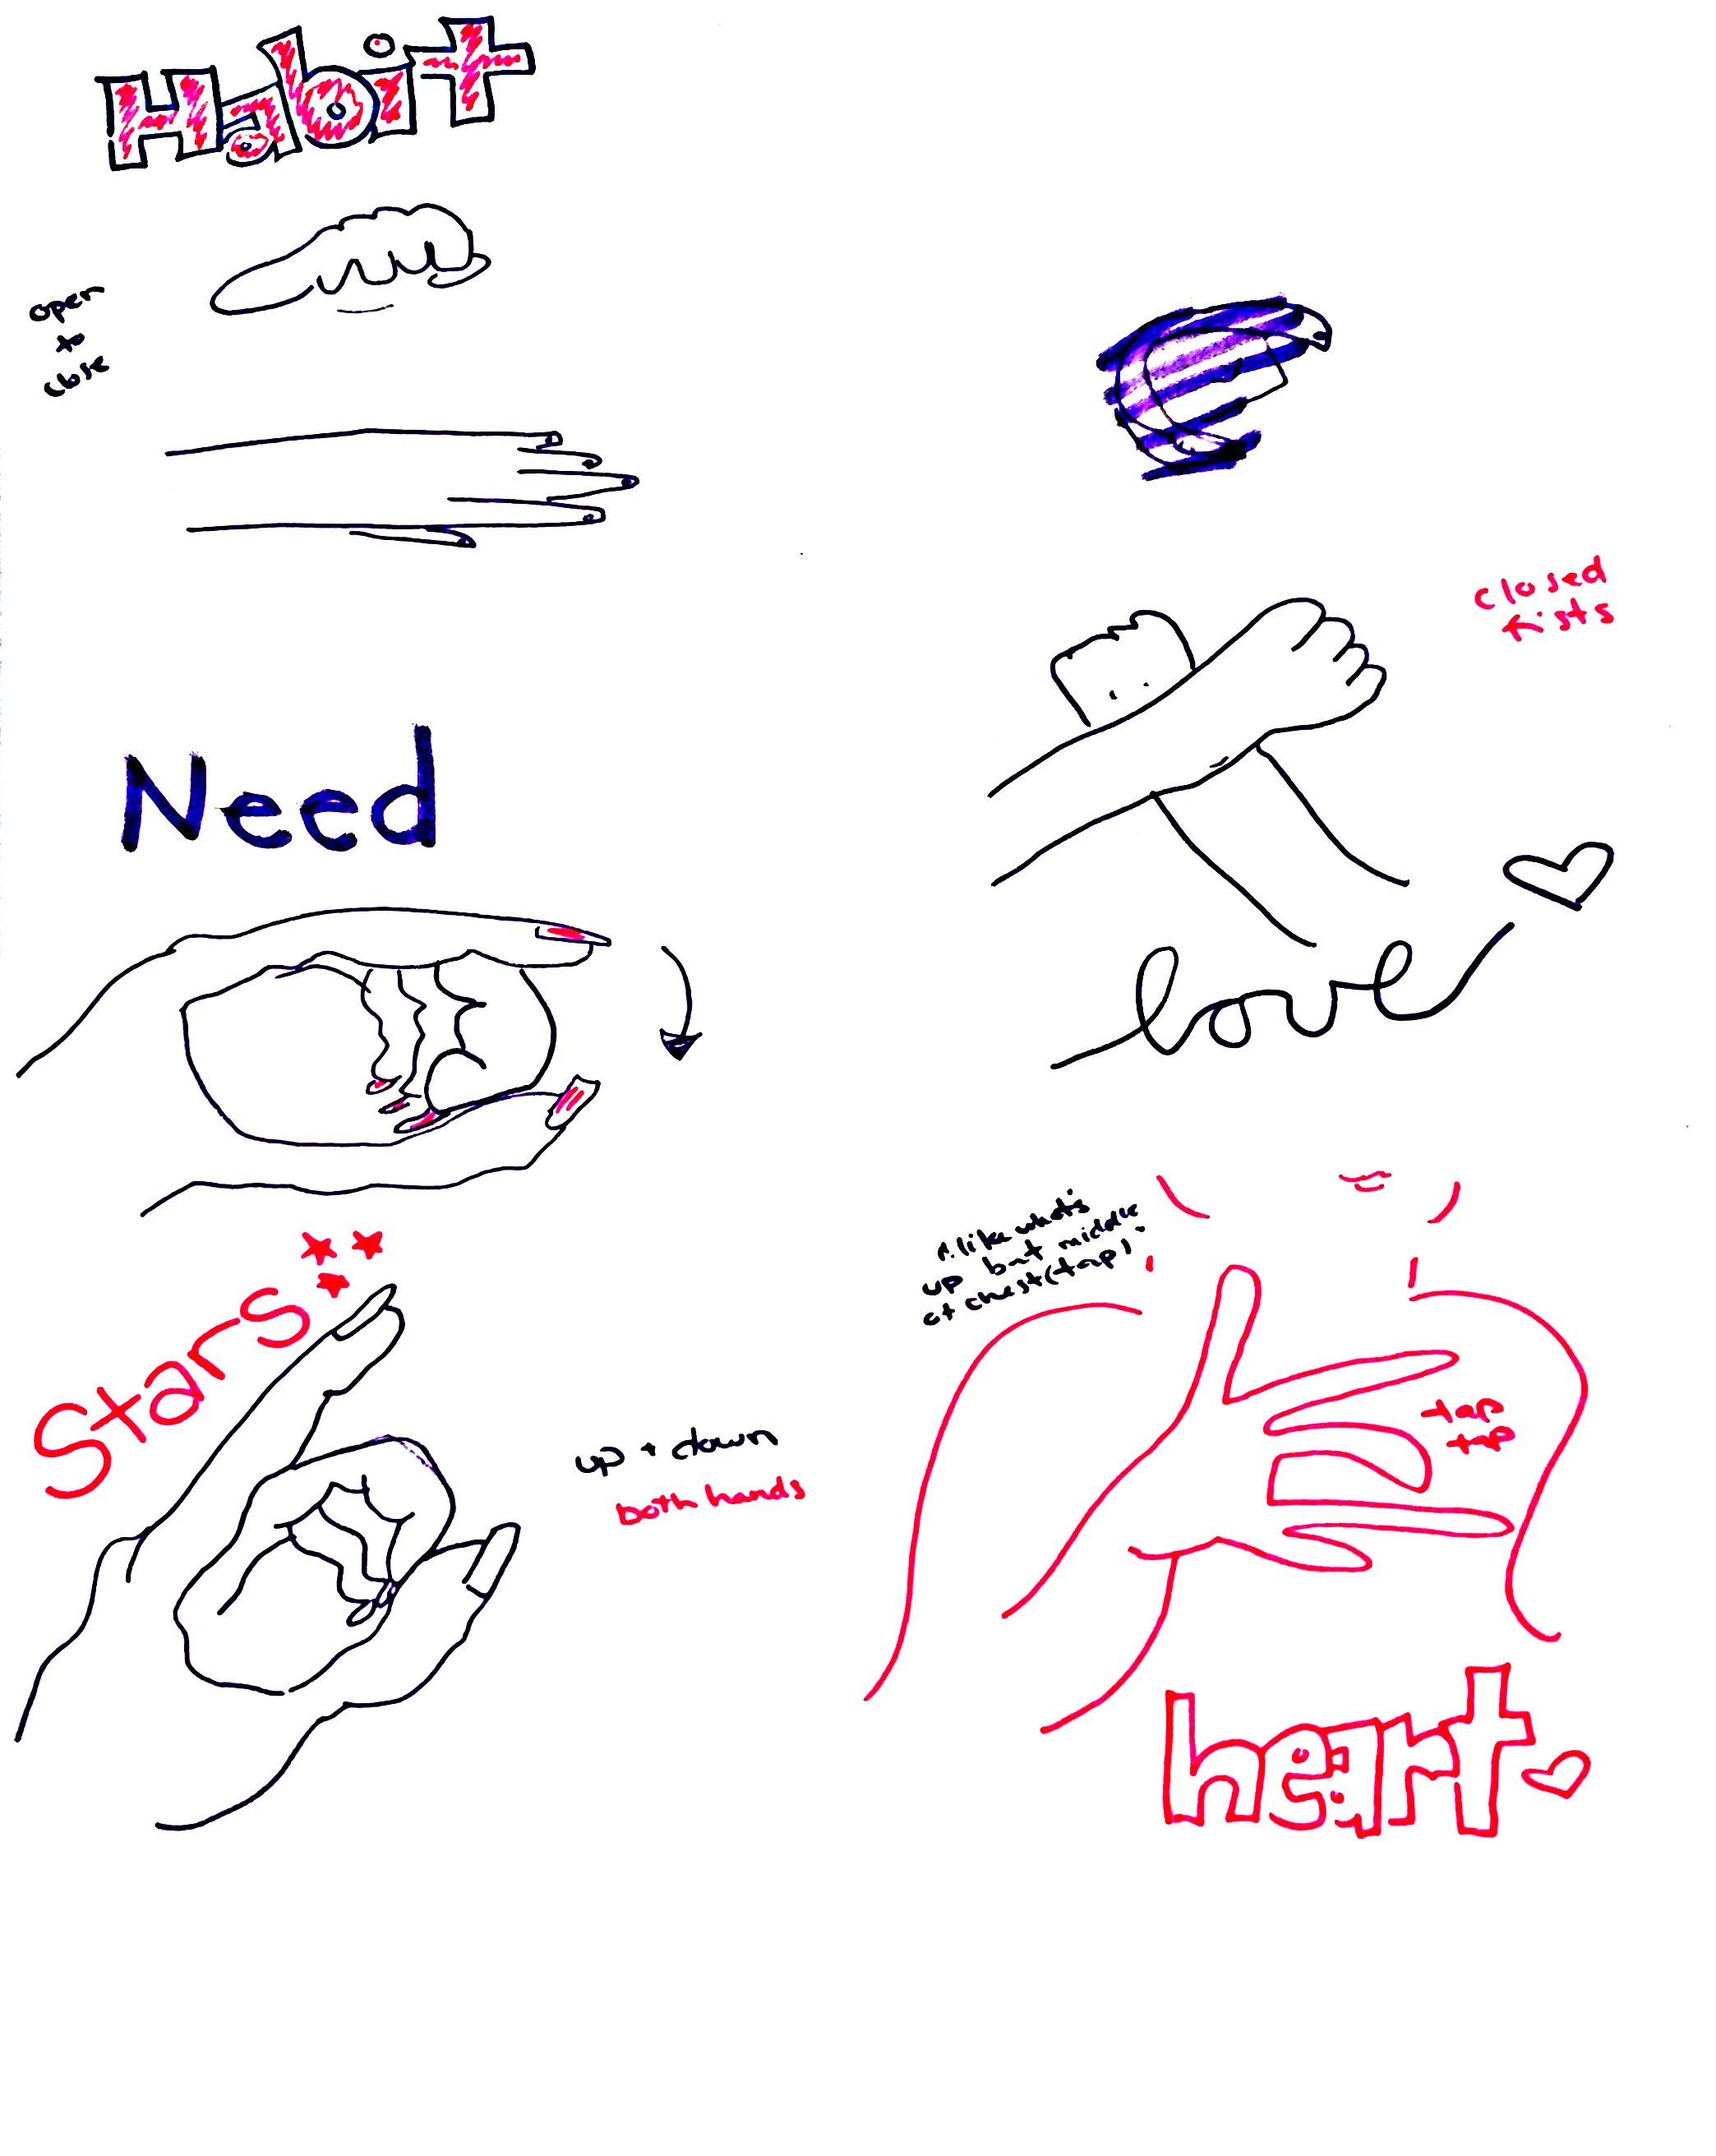 ASL Illustrations by Angie